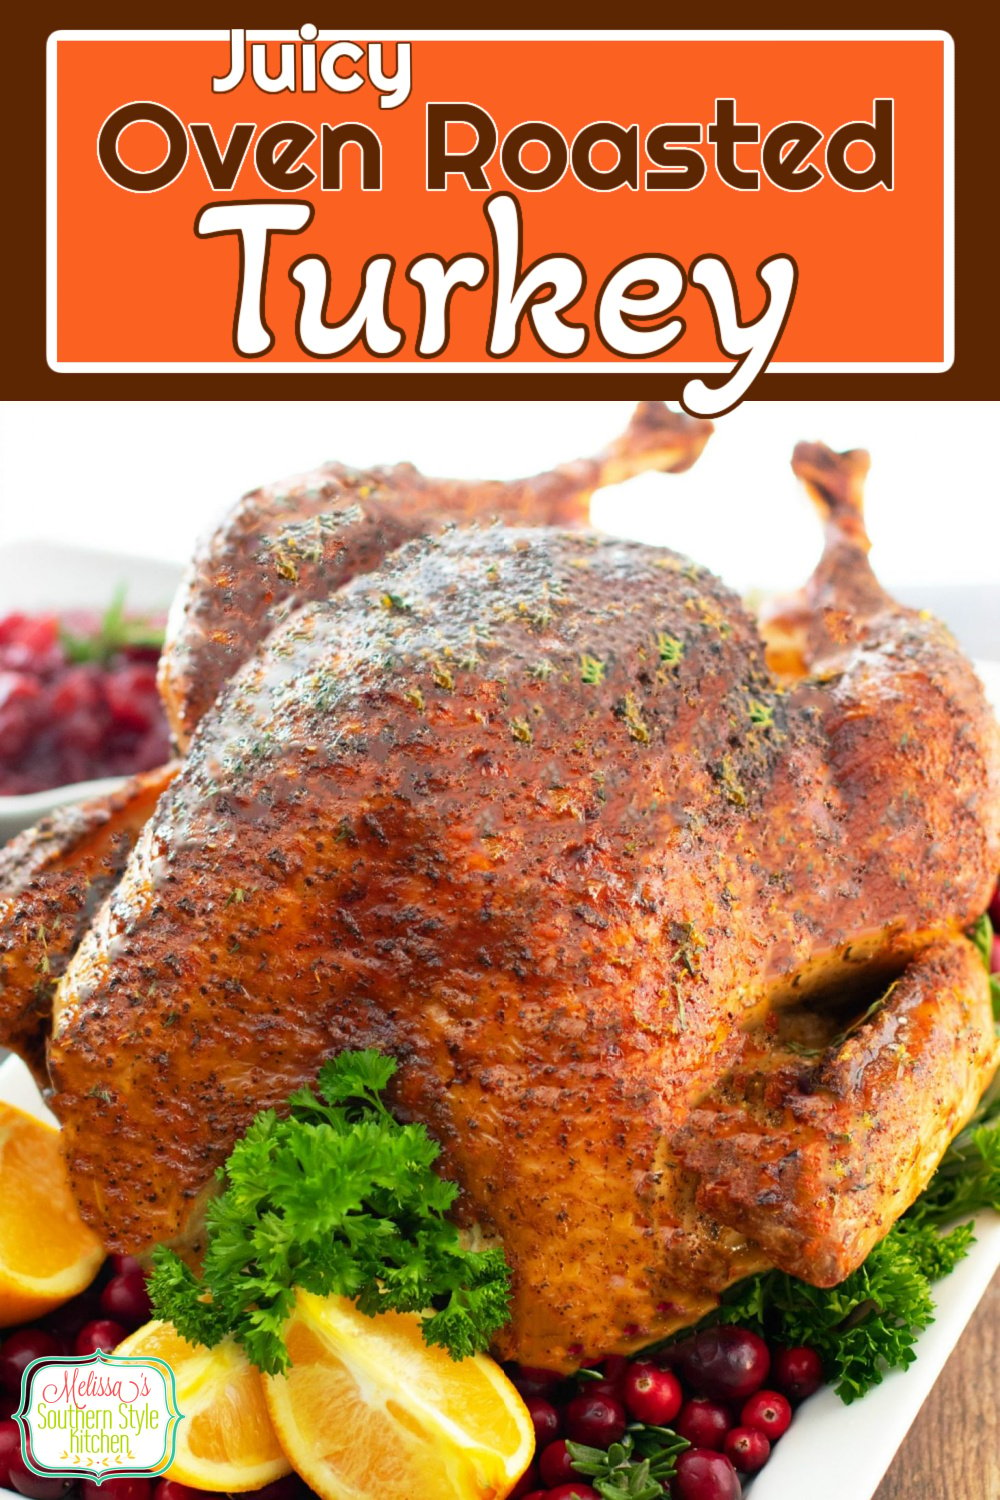 A flavorful rub and a citrus herb butter is a spectacular combination of flavor for this Oven Roasted Turkey #ovenroastedturkey #turkey #roastturkey #thanksgivingrecipes #butterbastedturkey #dinner #holidayrecipes #southernfood #southernrecipes #poultry #howtomaketurkey #christmasdinner #dinnerrecipes via @melissasssk